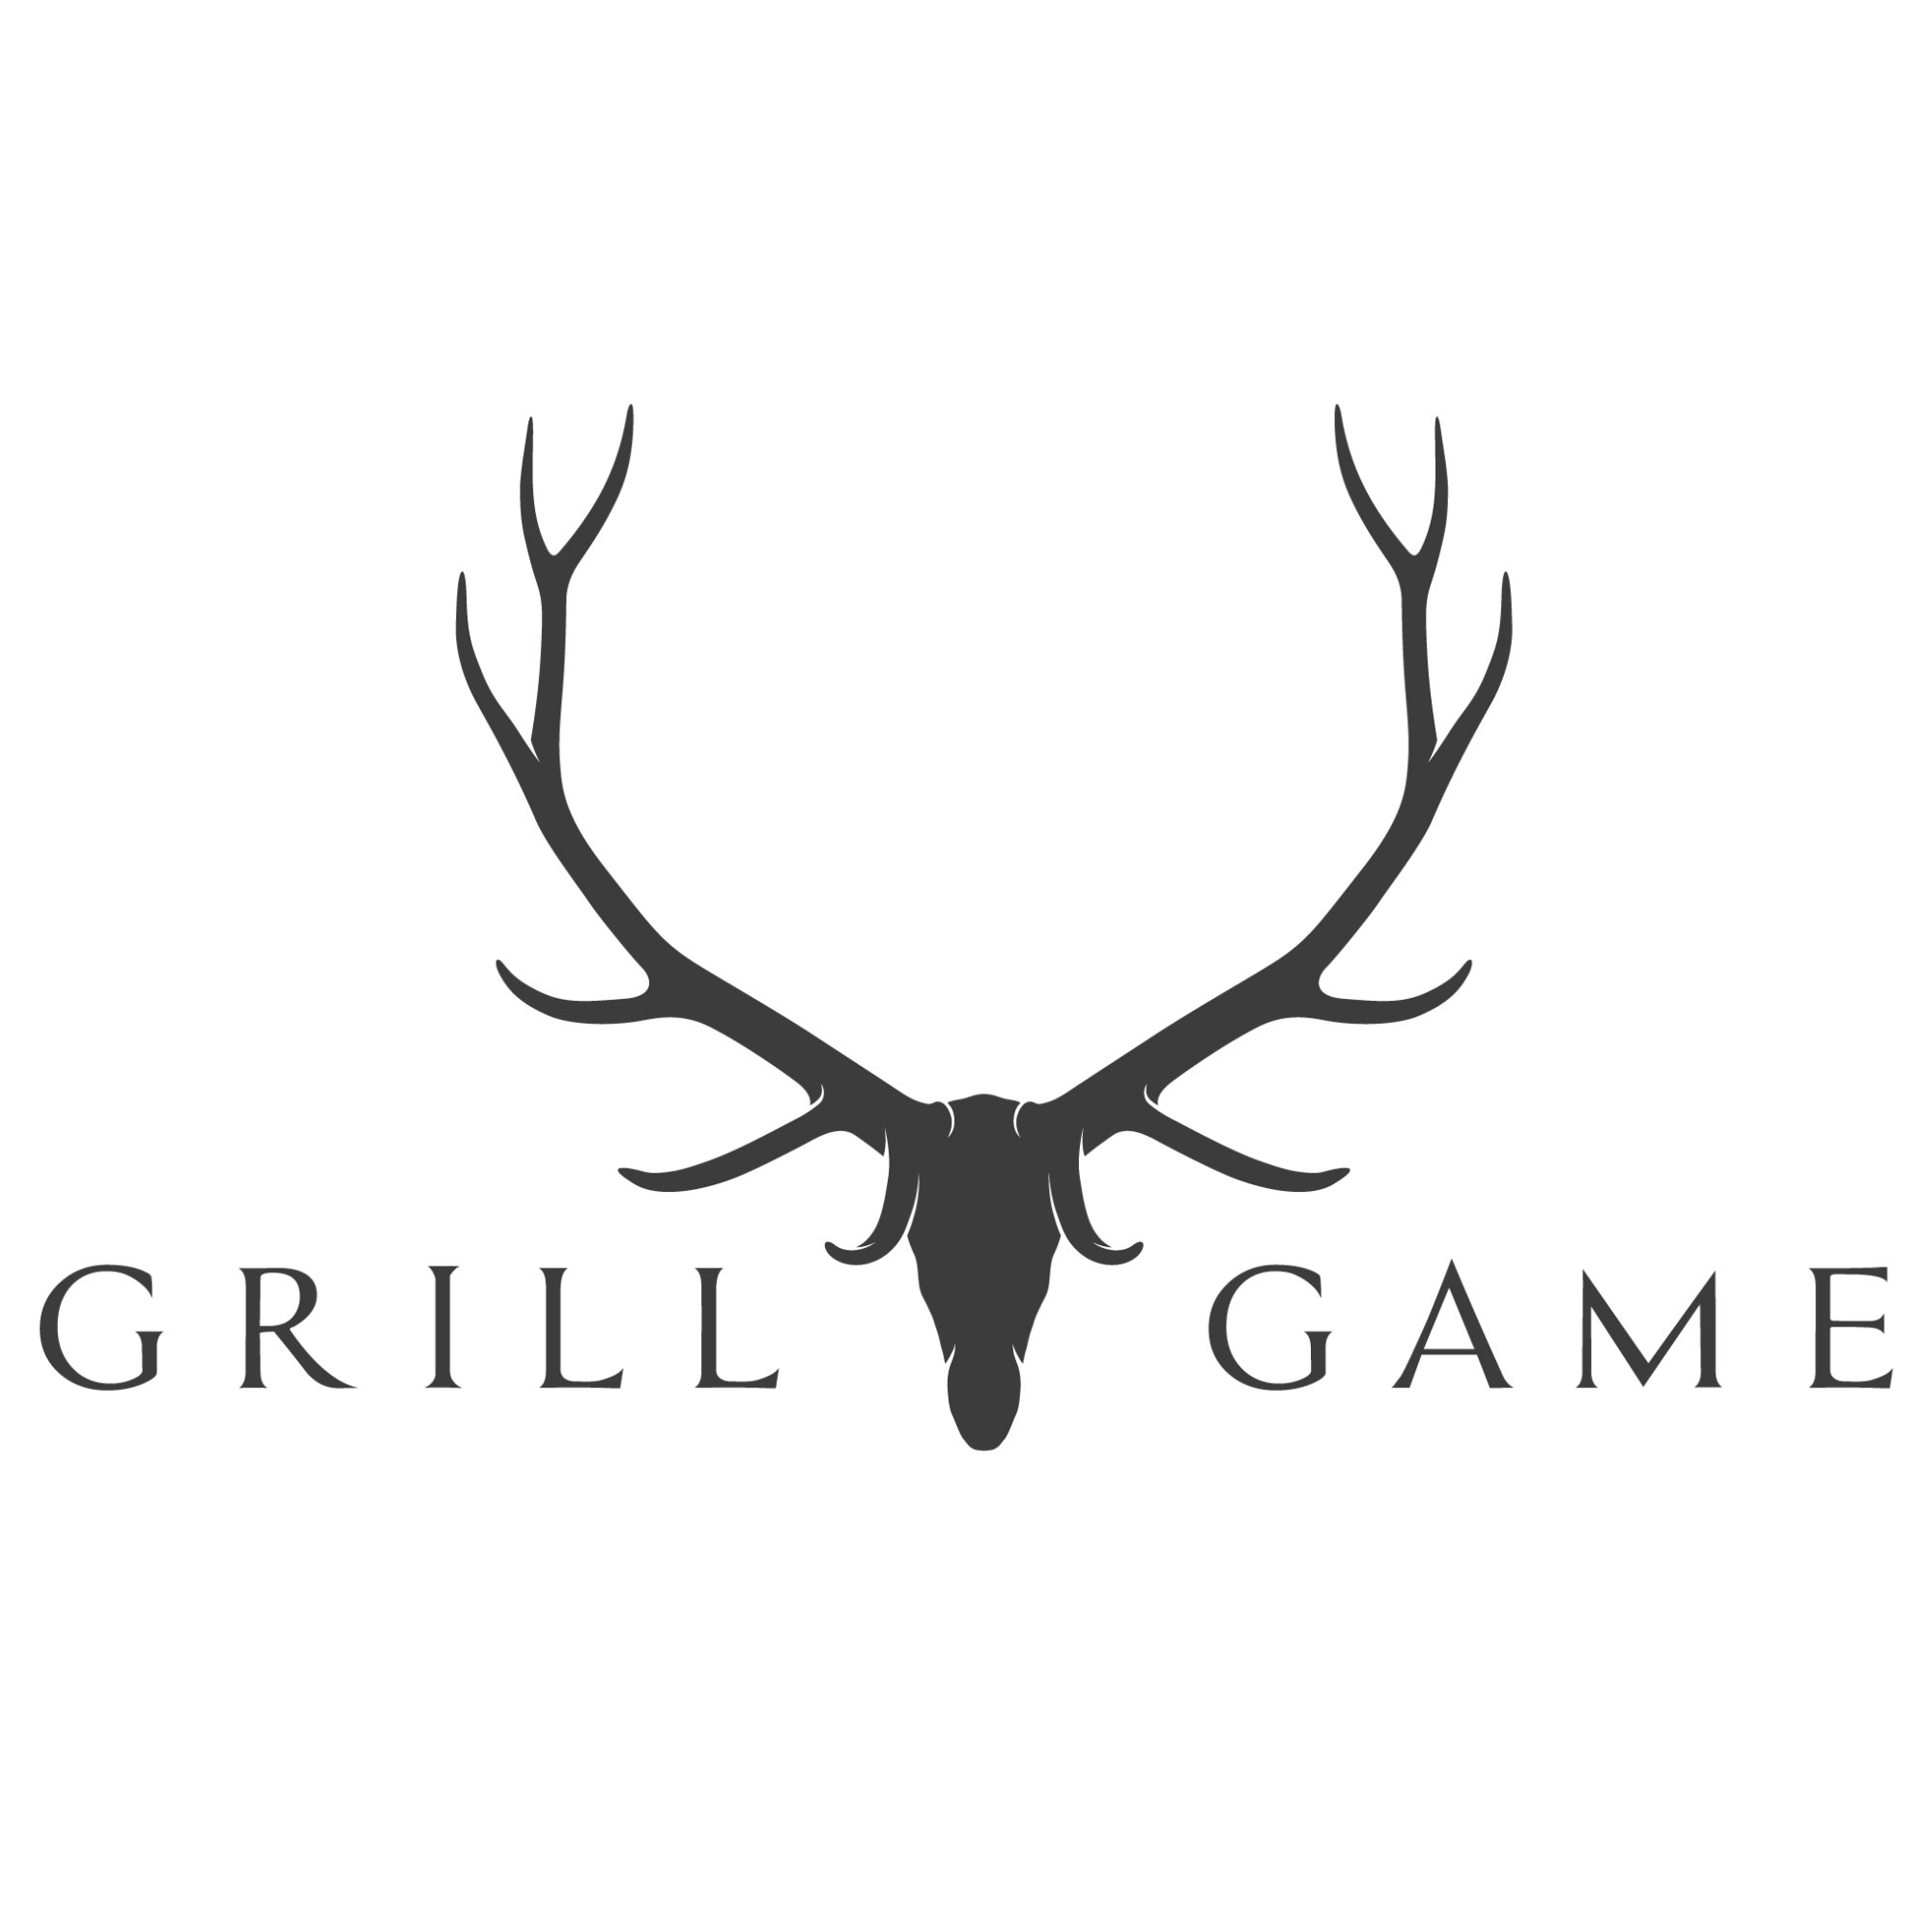 Grill Game logo